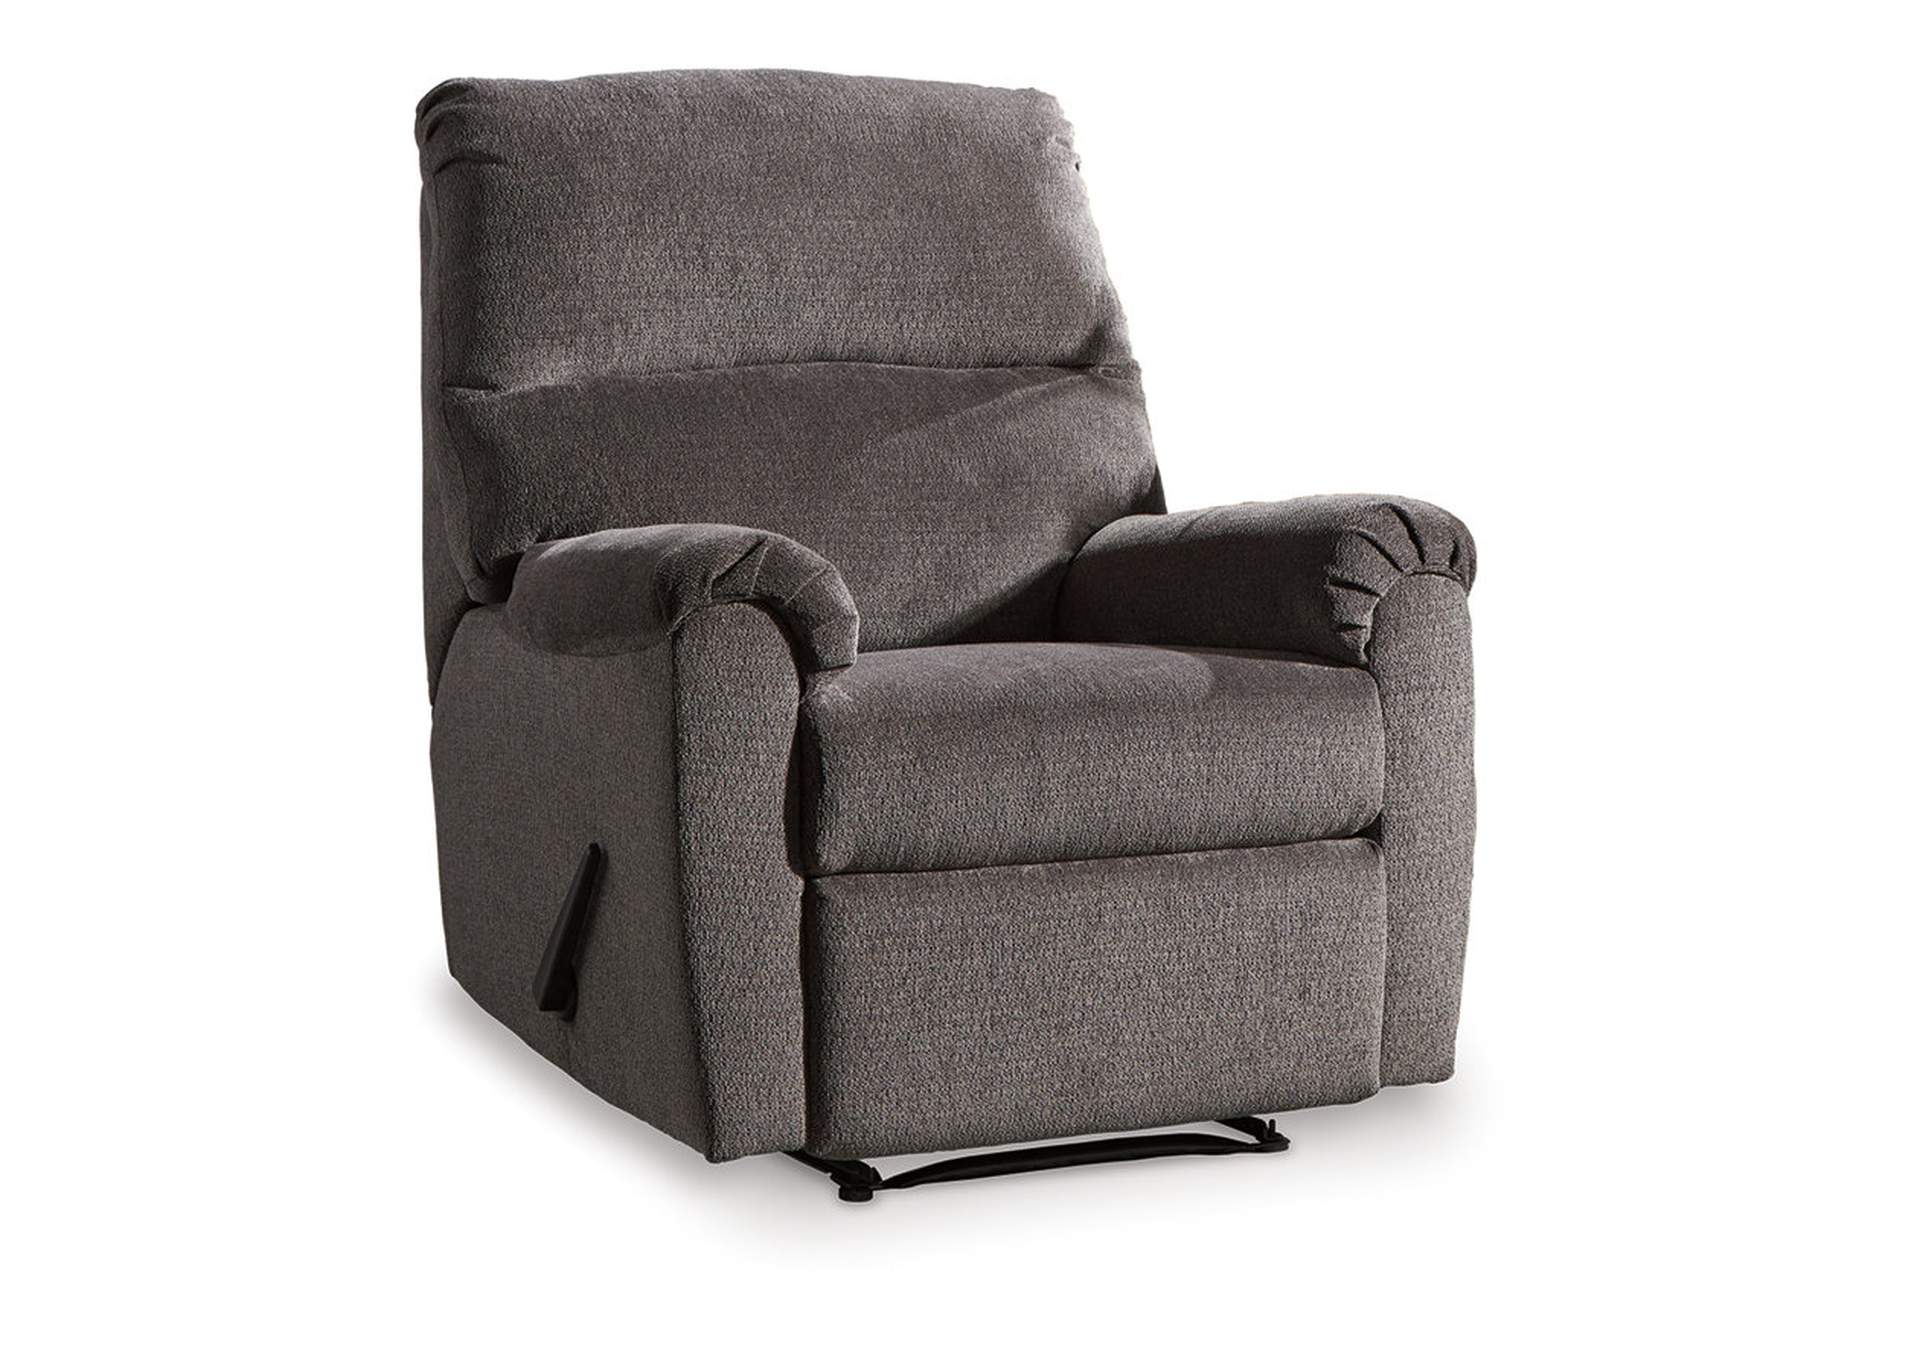 Nerviano Recliner,Signature Design By Ashley